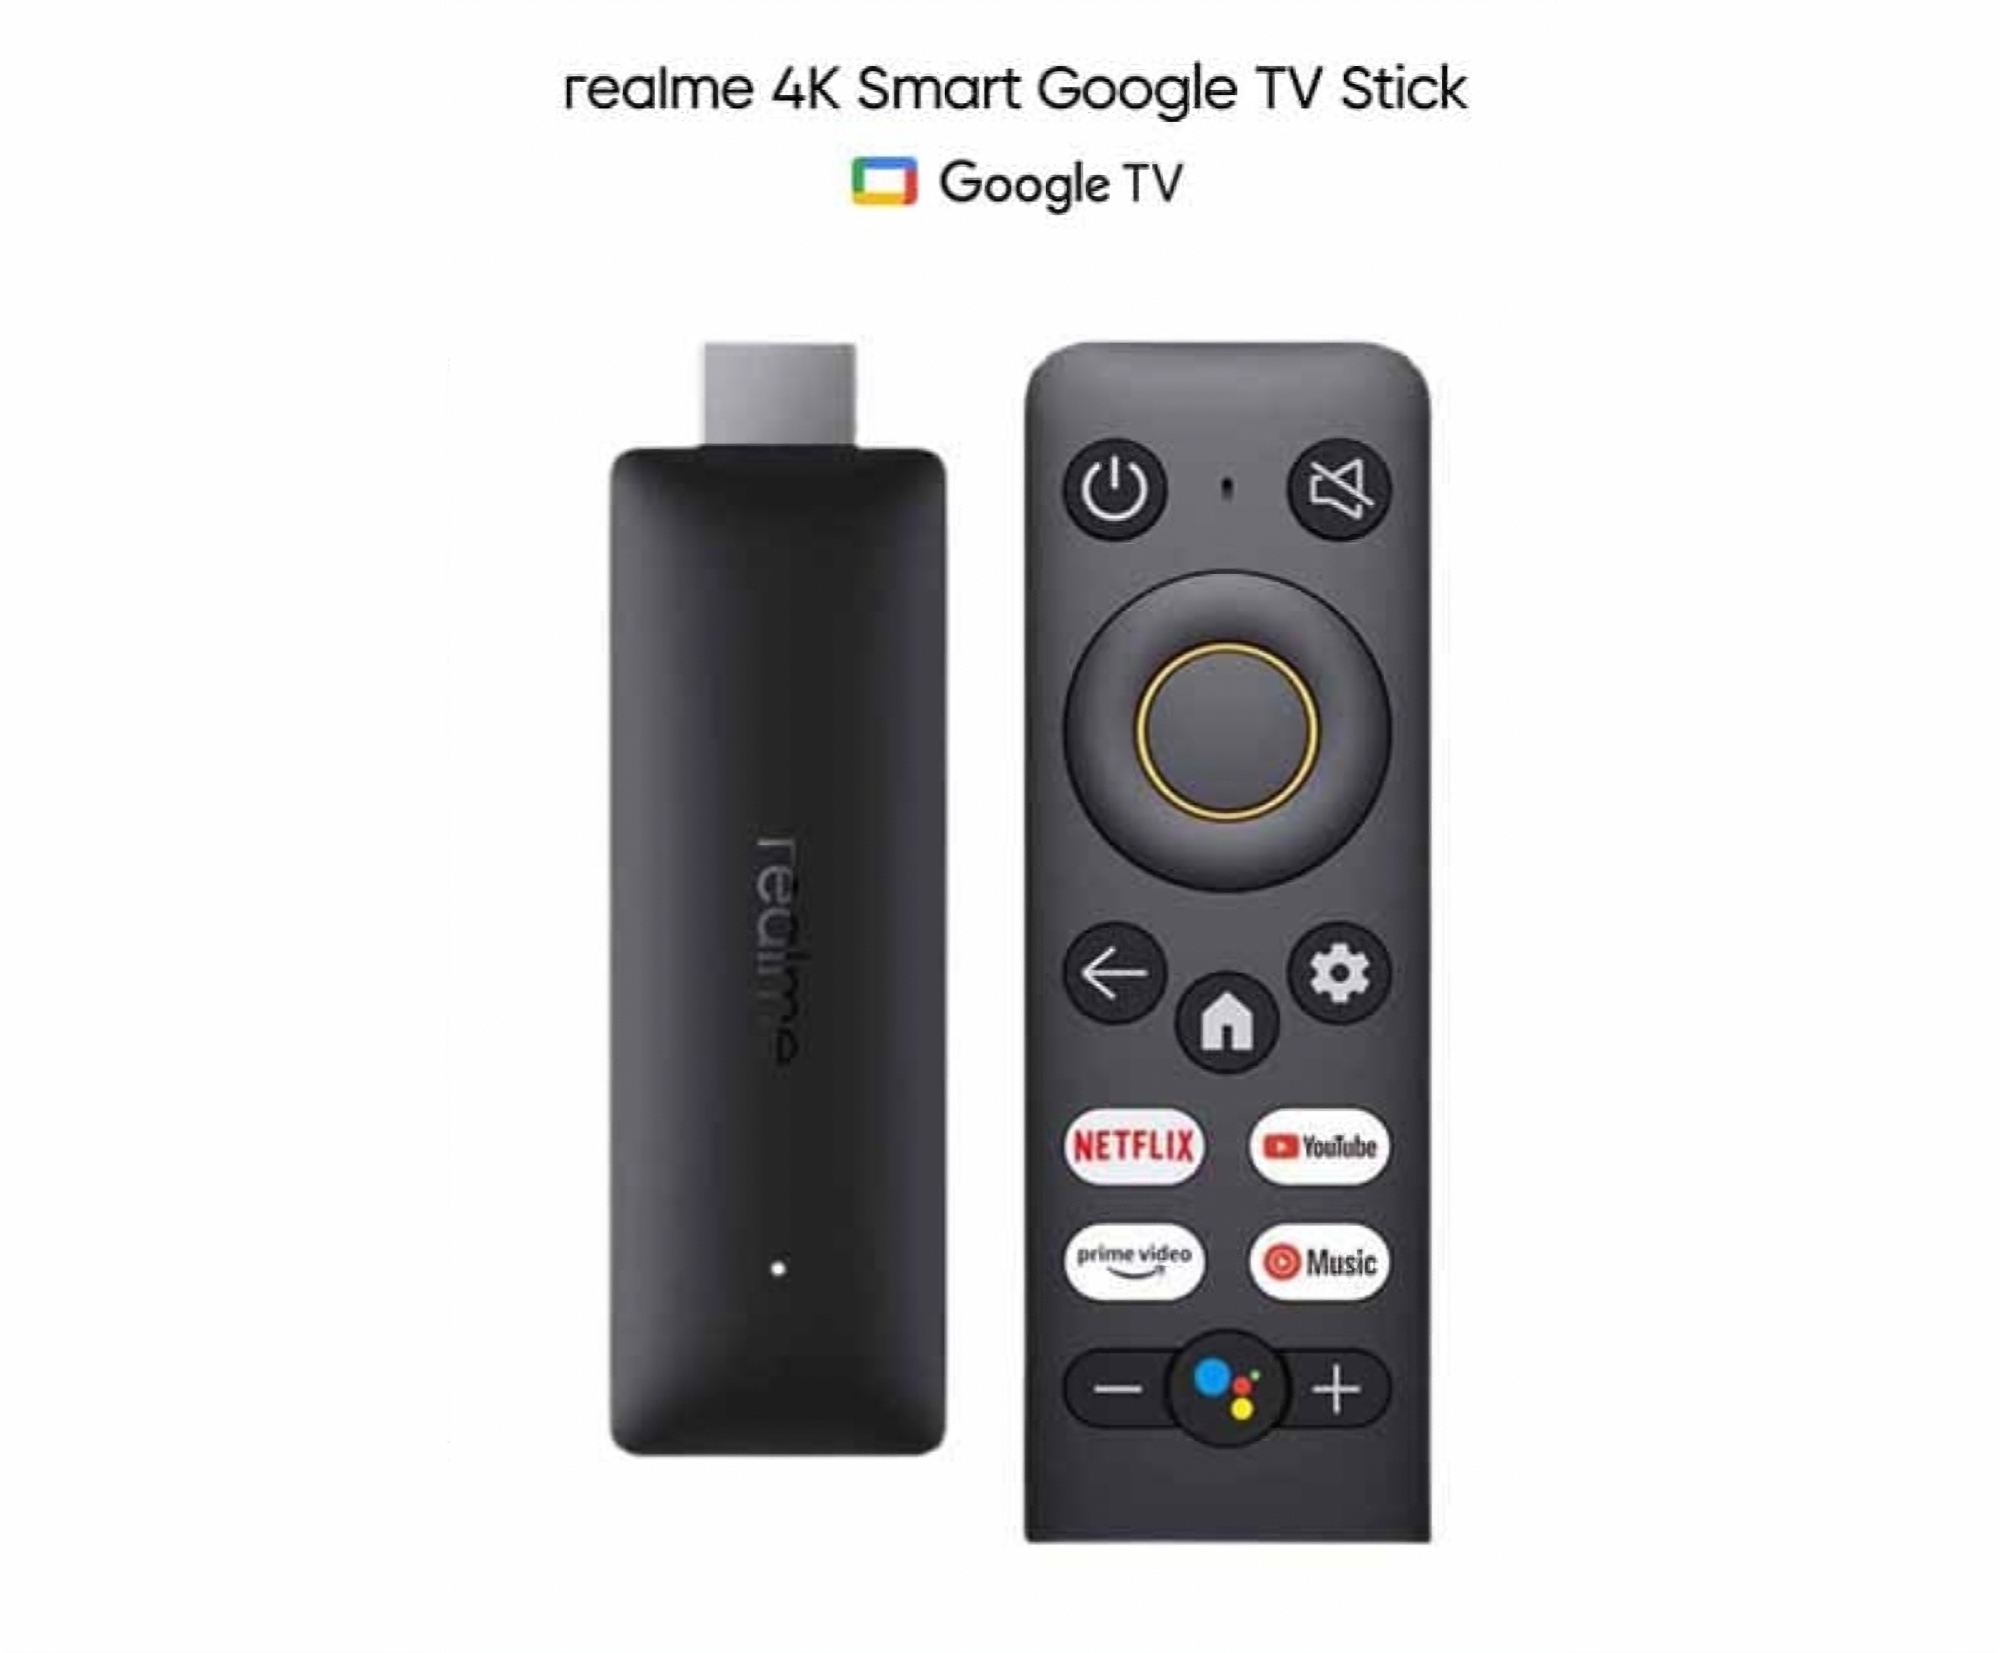 realme TV Stick with 4K support and Google TV on board sell for less than $  45 on AliExpress